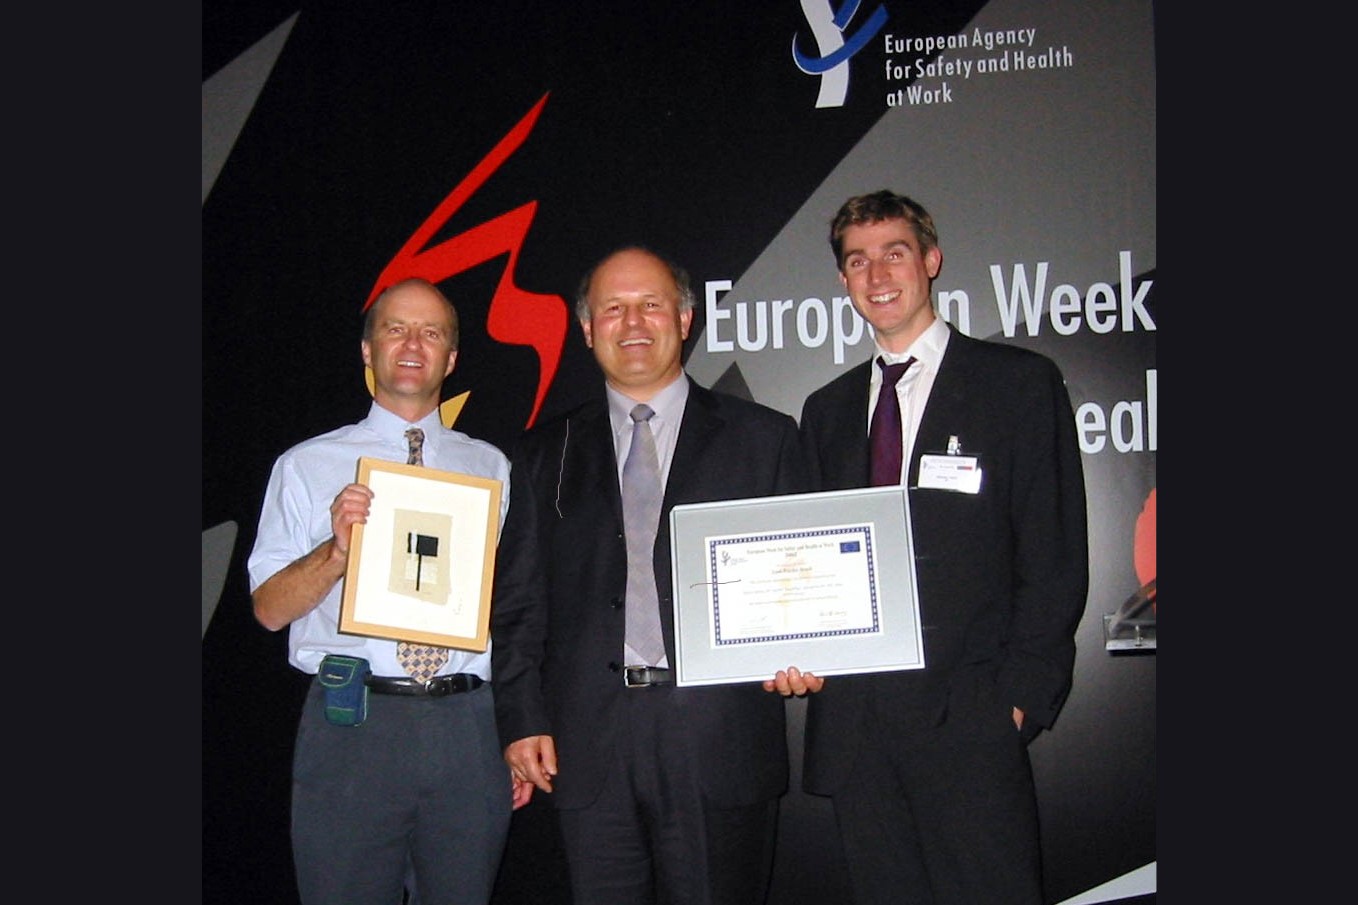 European Good Practice Award for preventing stress at work